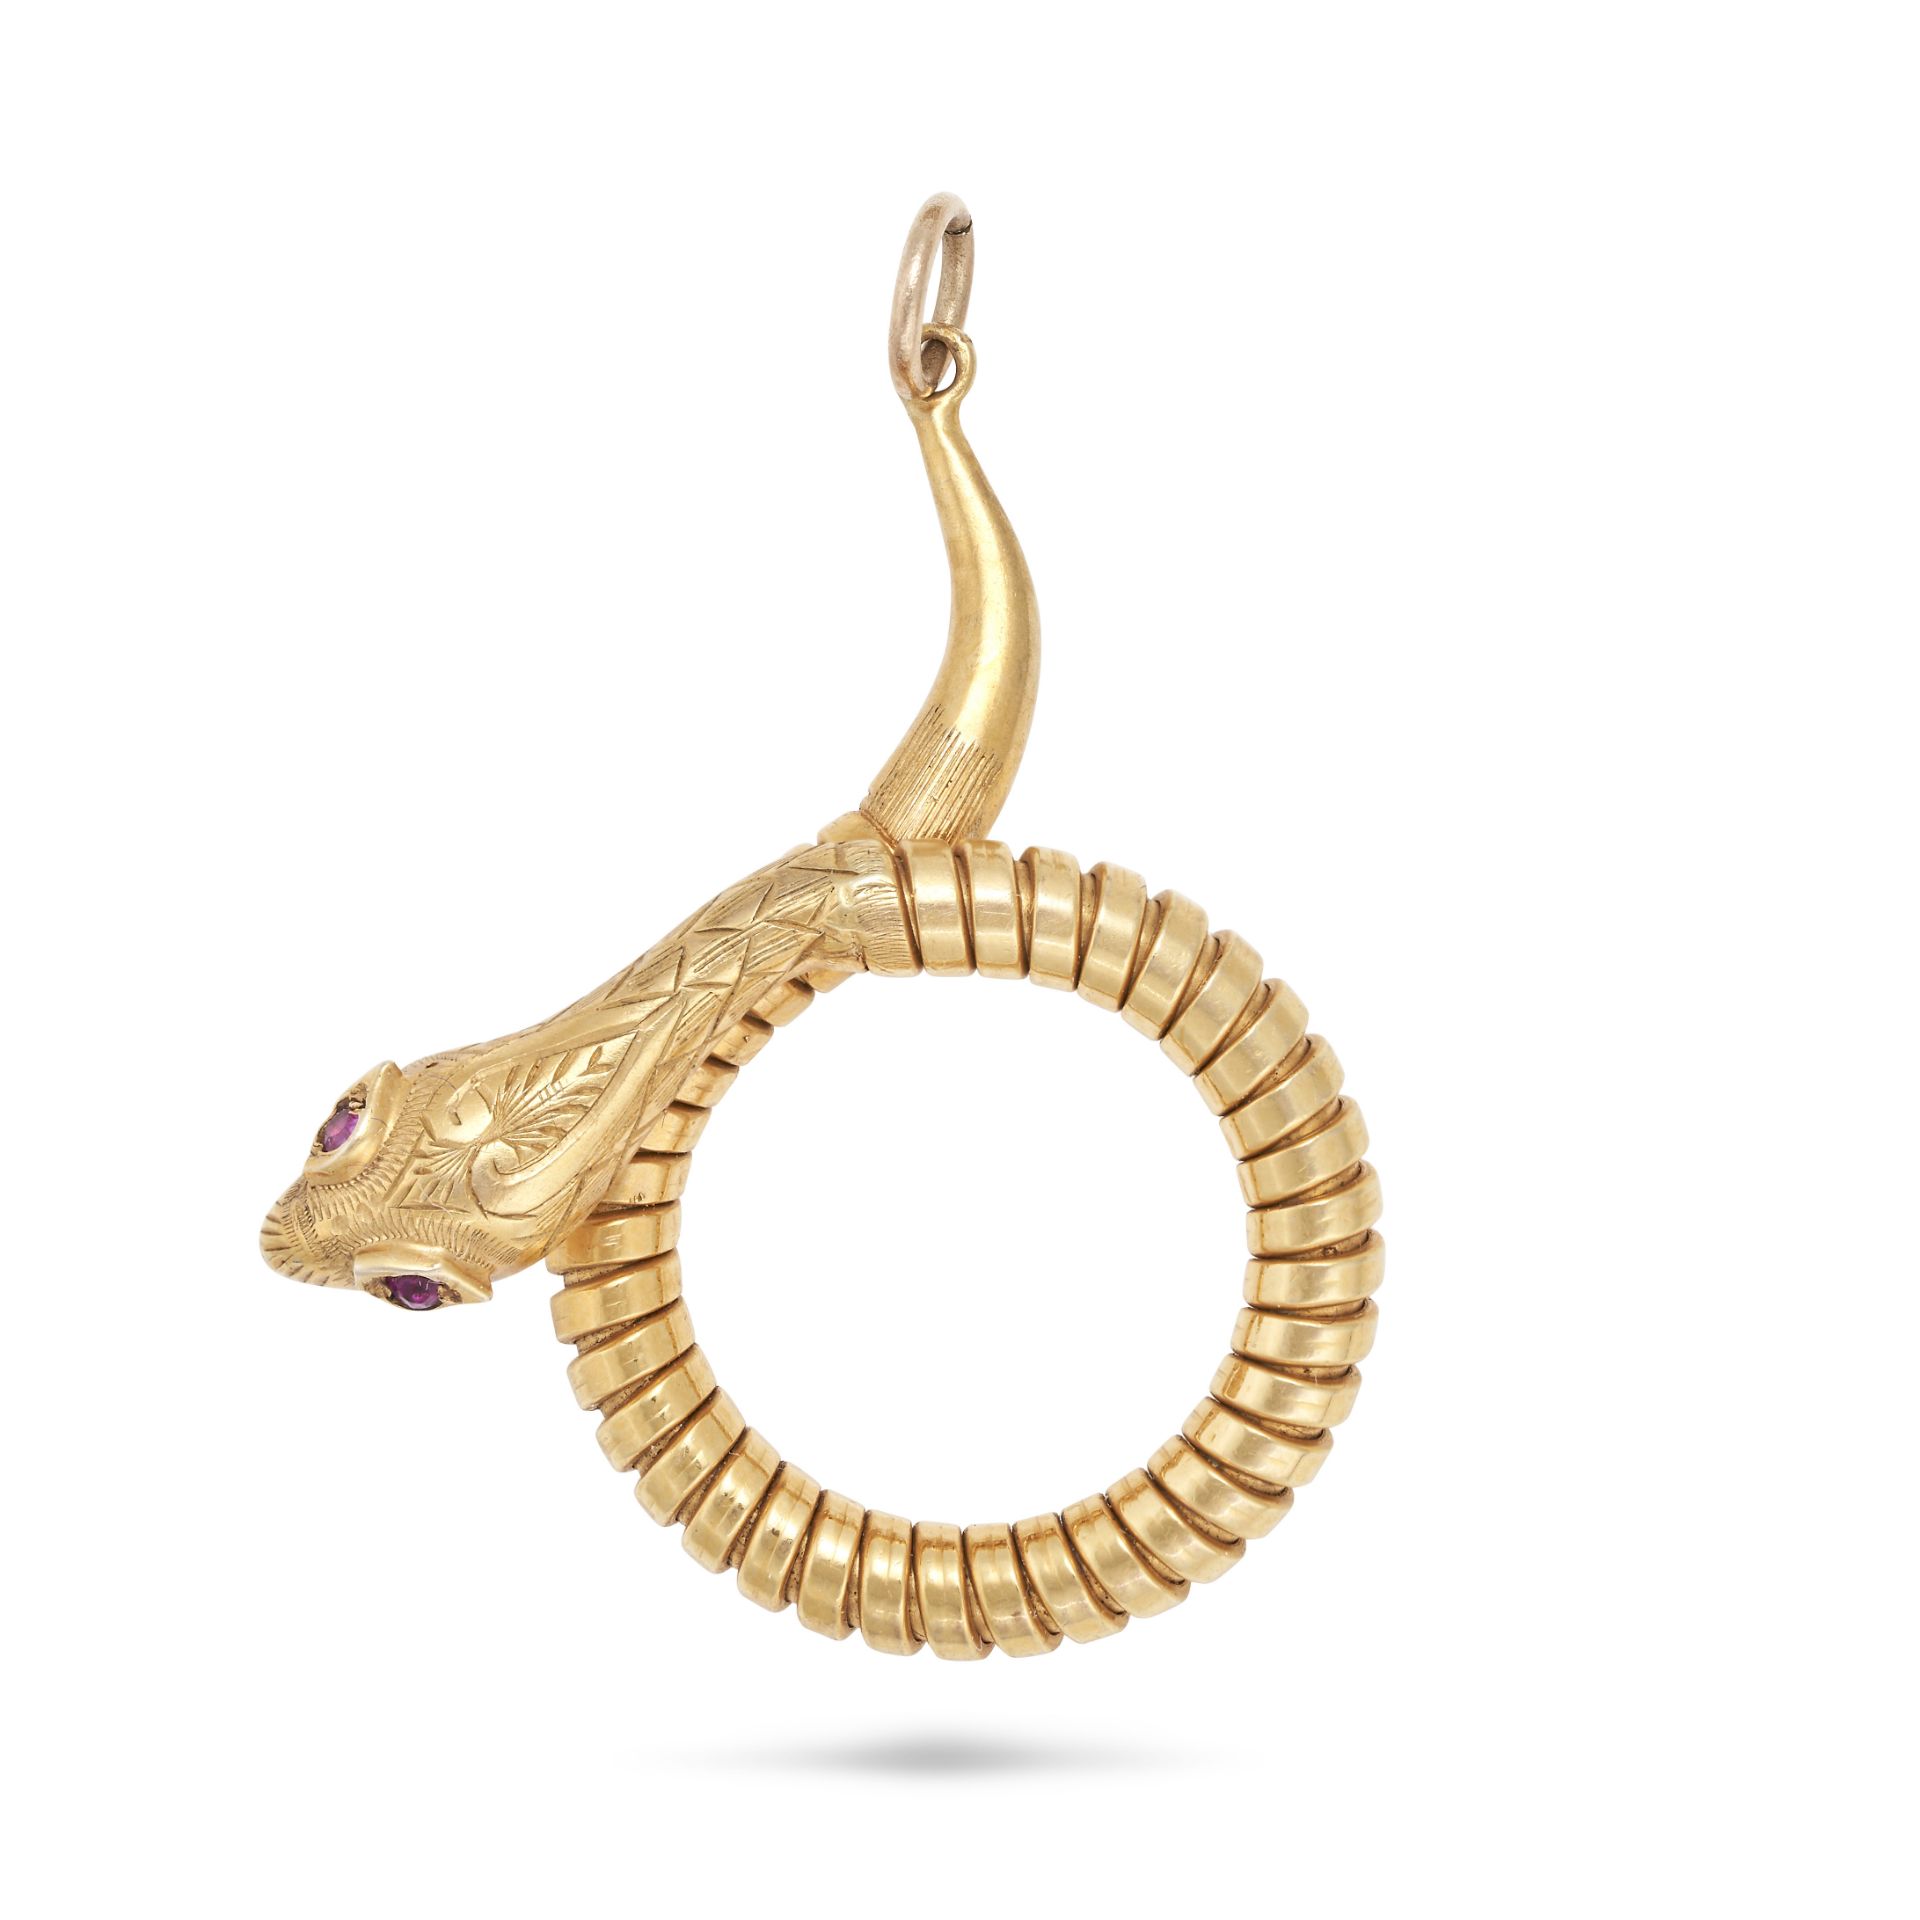 NO RESERVE - A RUBY SNAKE PENDANT in 9ct yellow gold, designed as a coiled snake with a gas pipe ...